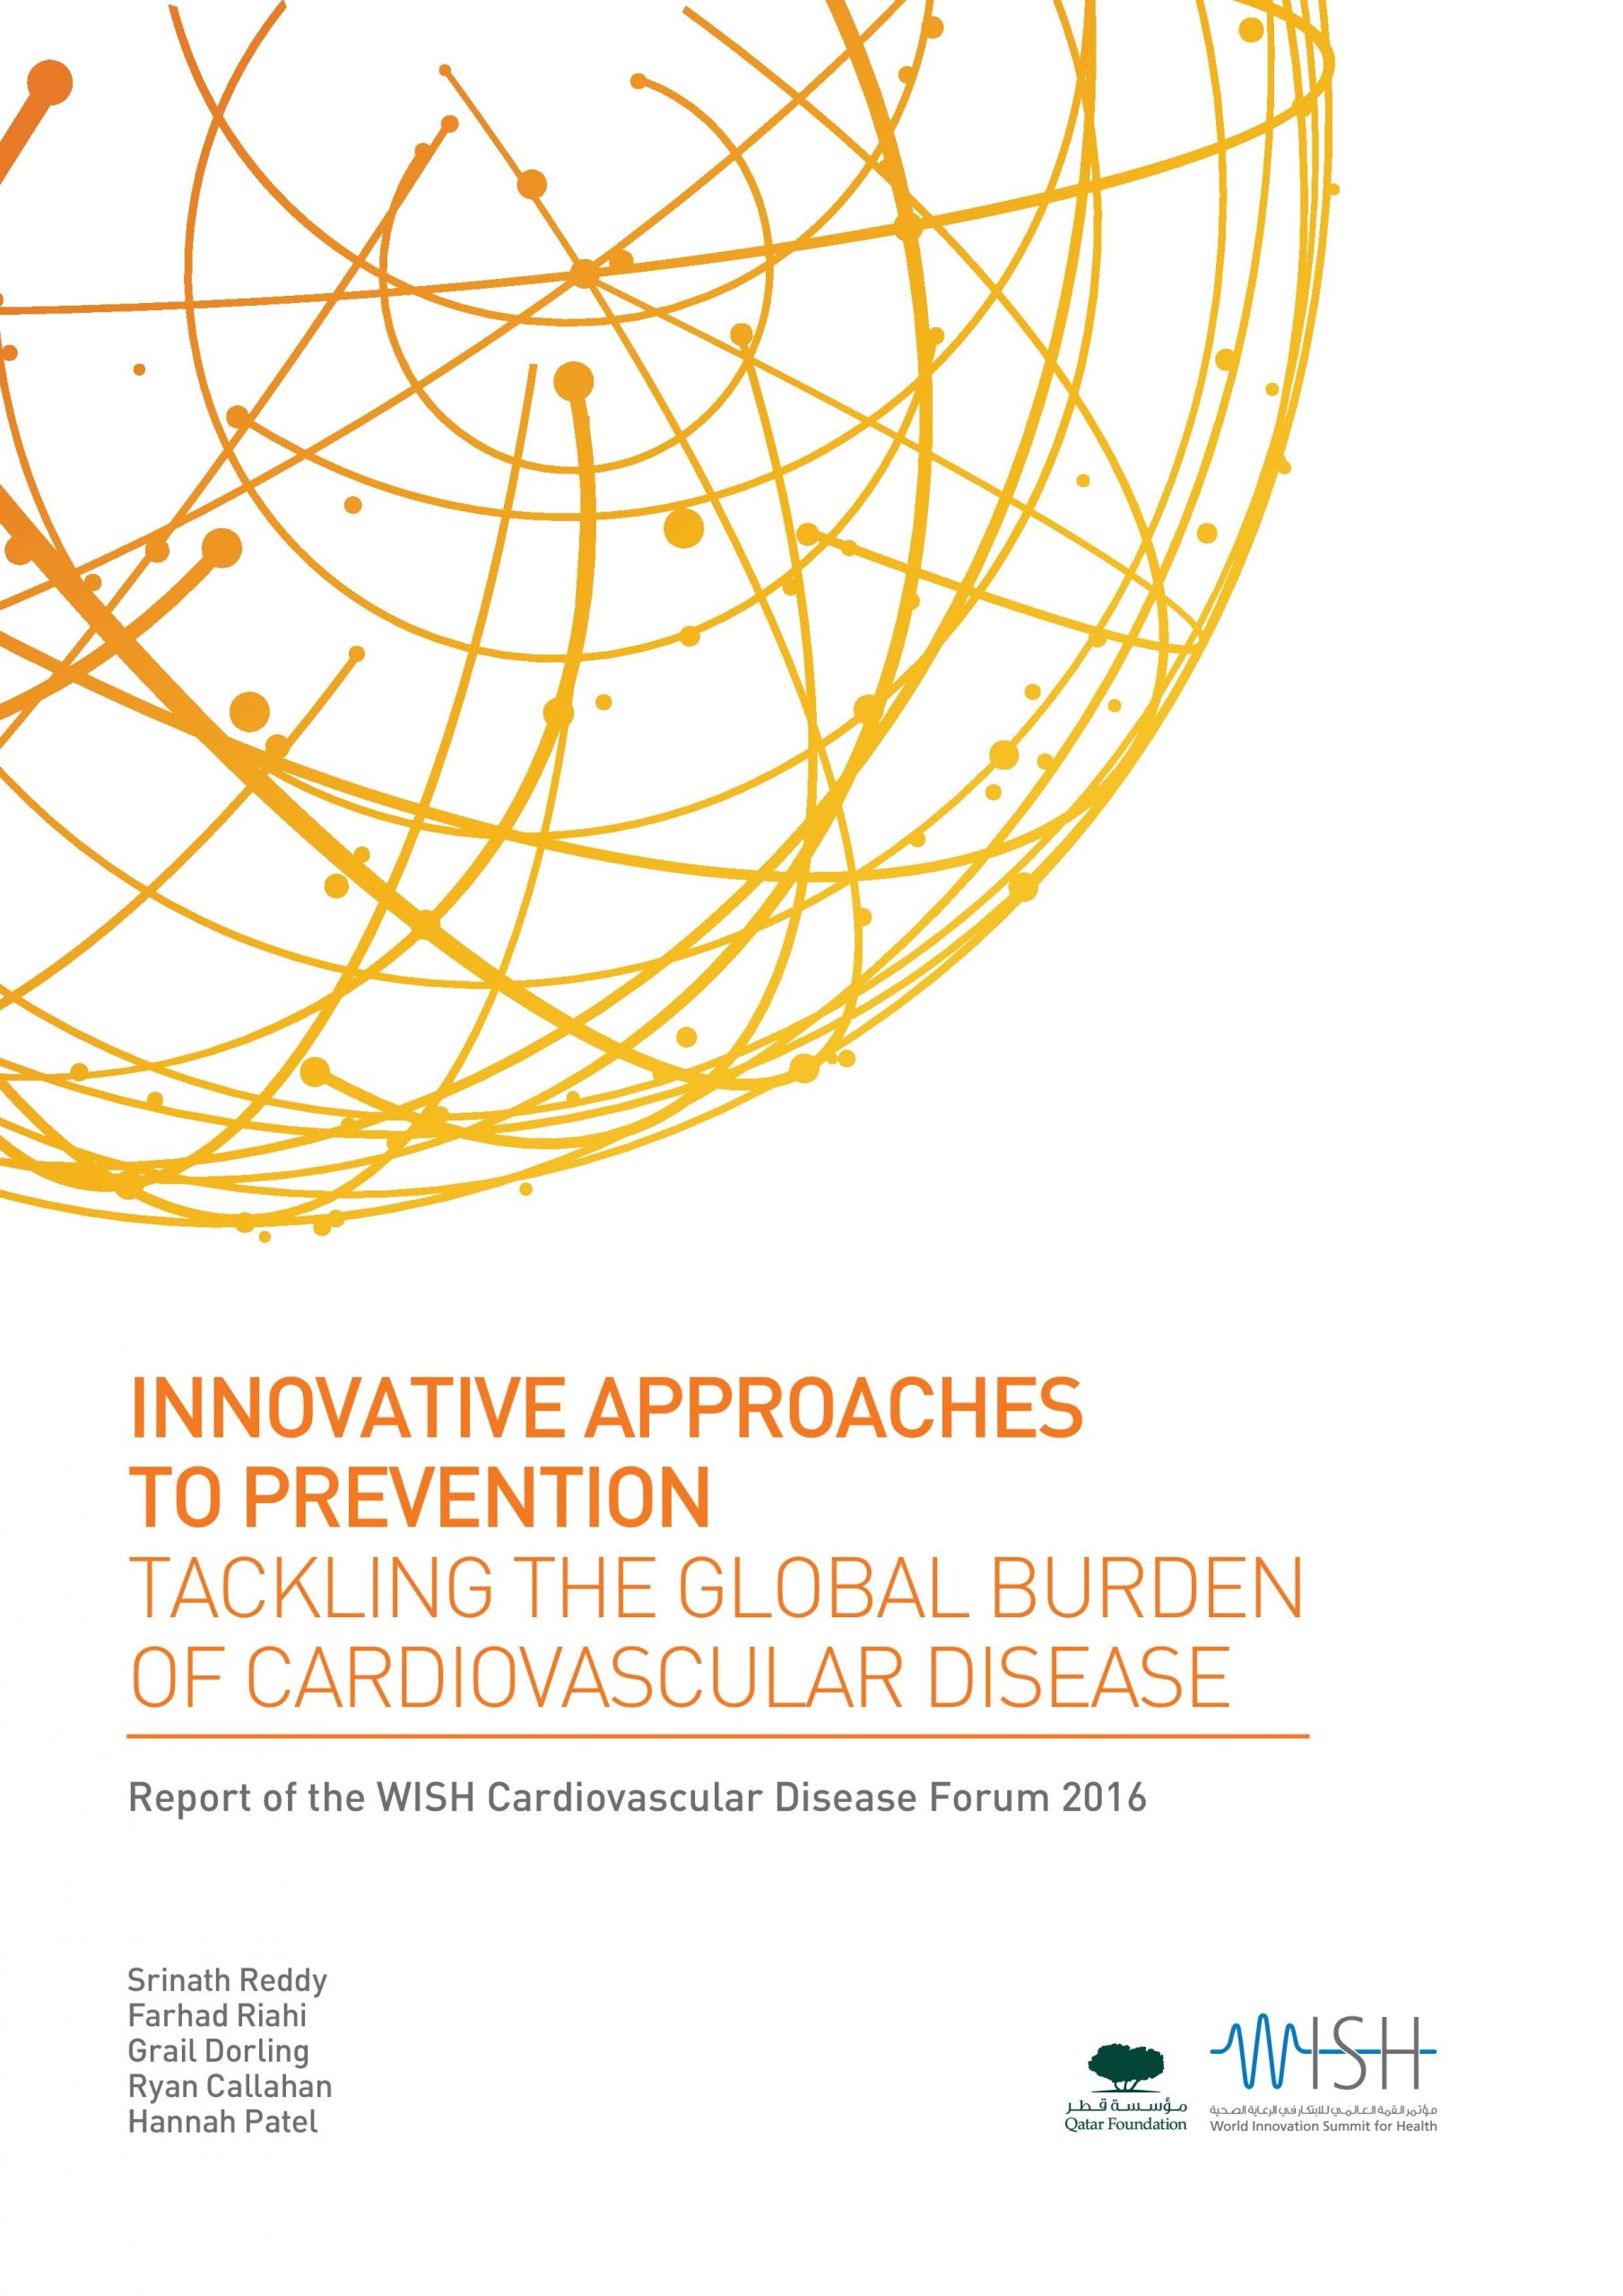 Innovative Approaches to Prevention: Tackling the Global Burden of Cardiovascular Disease 